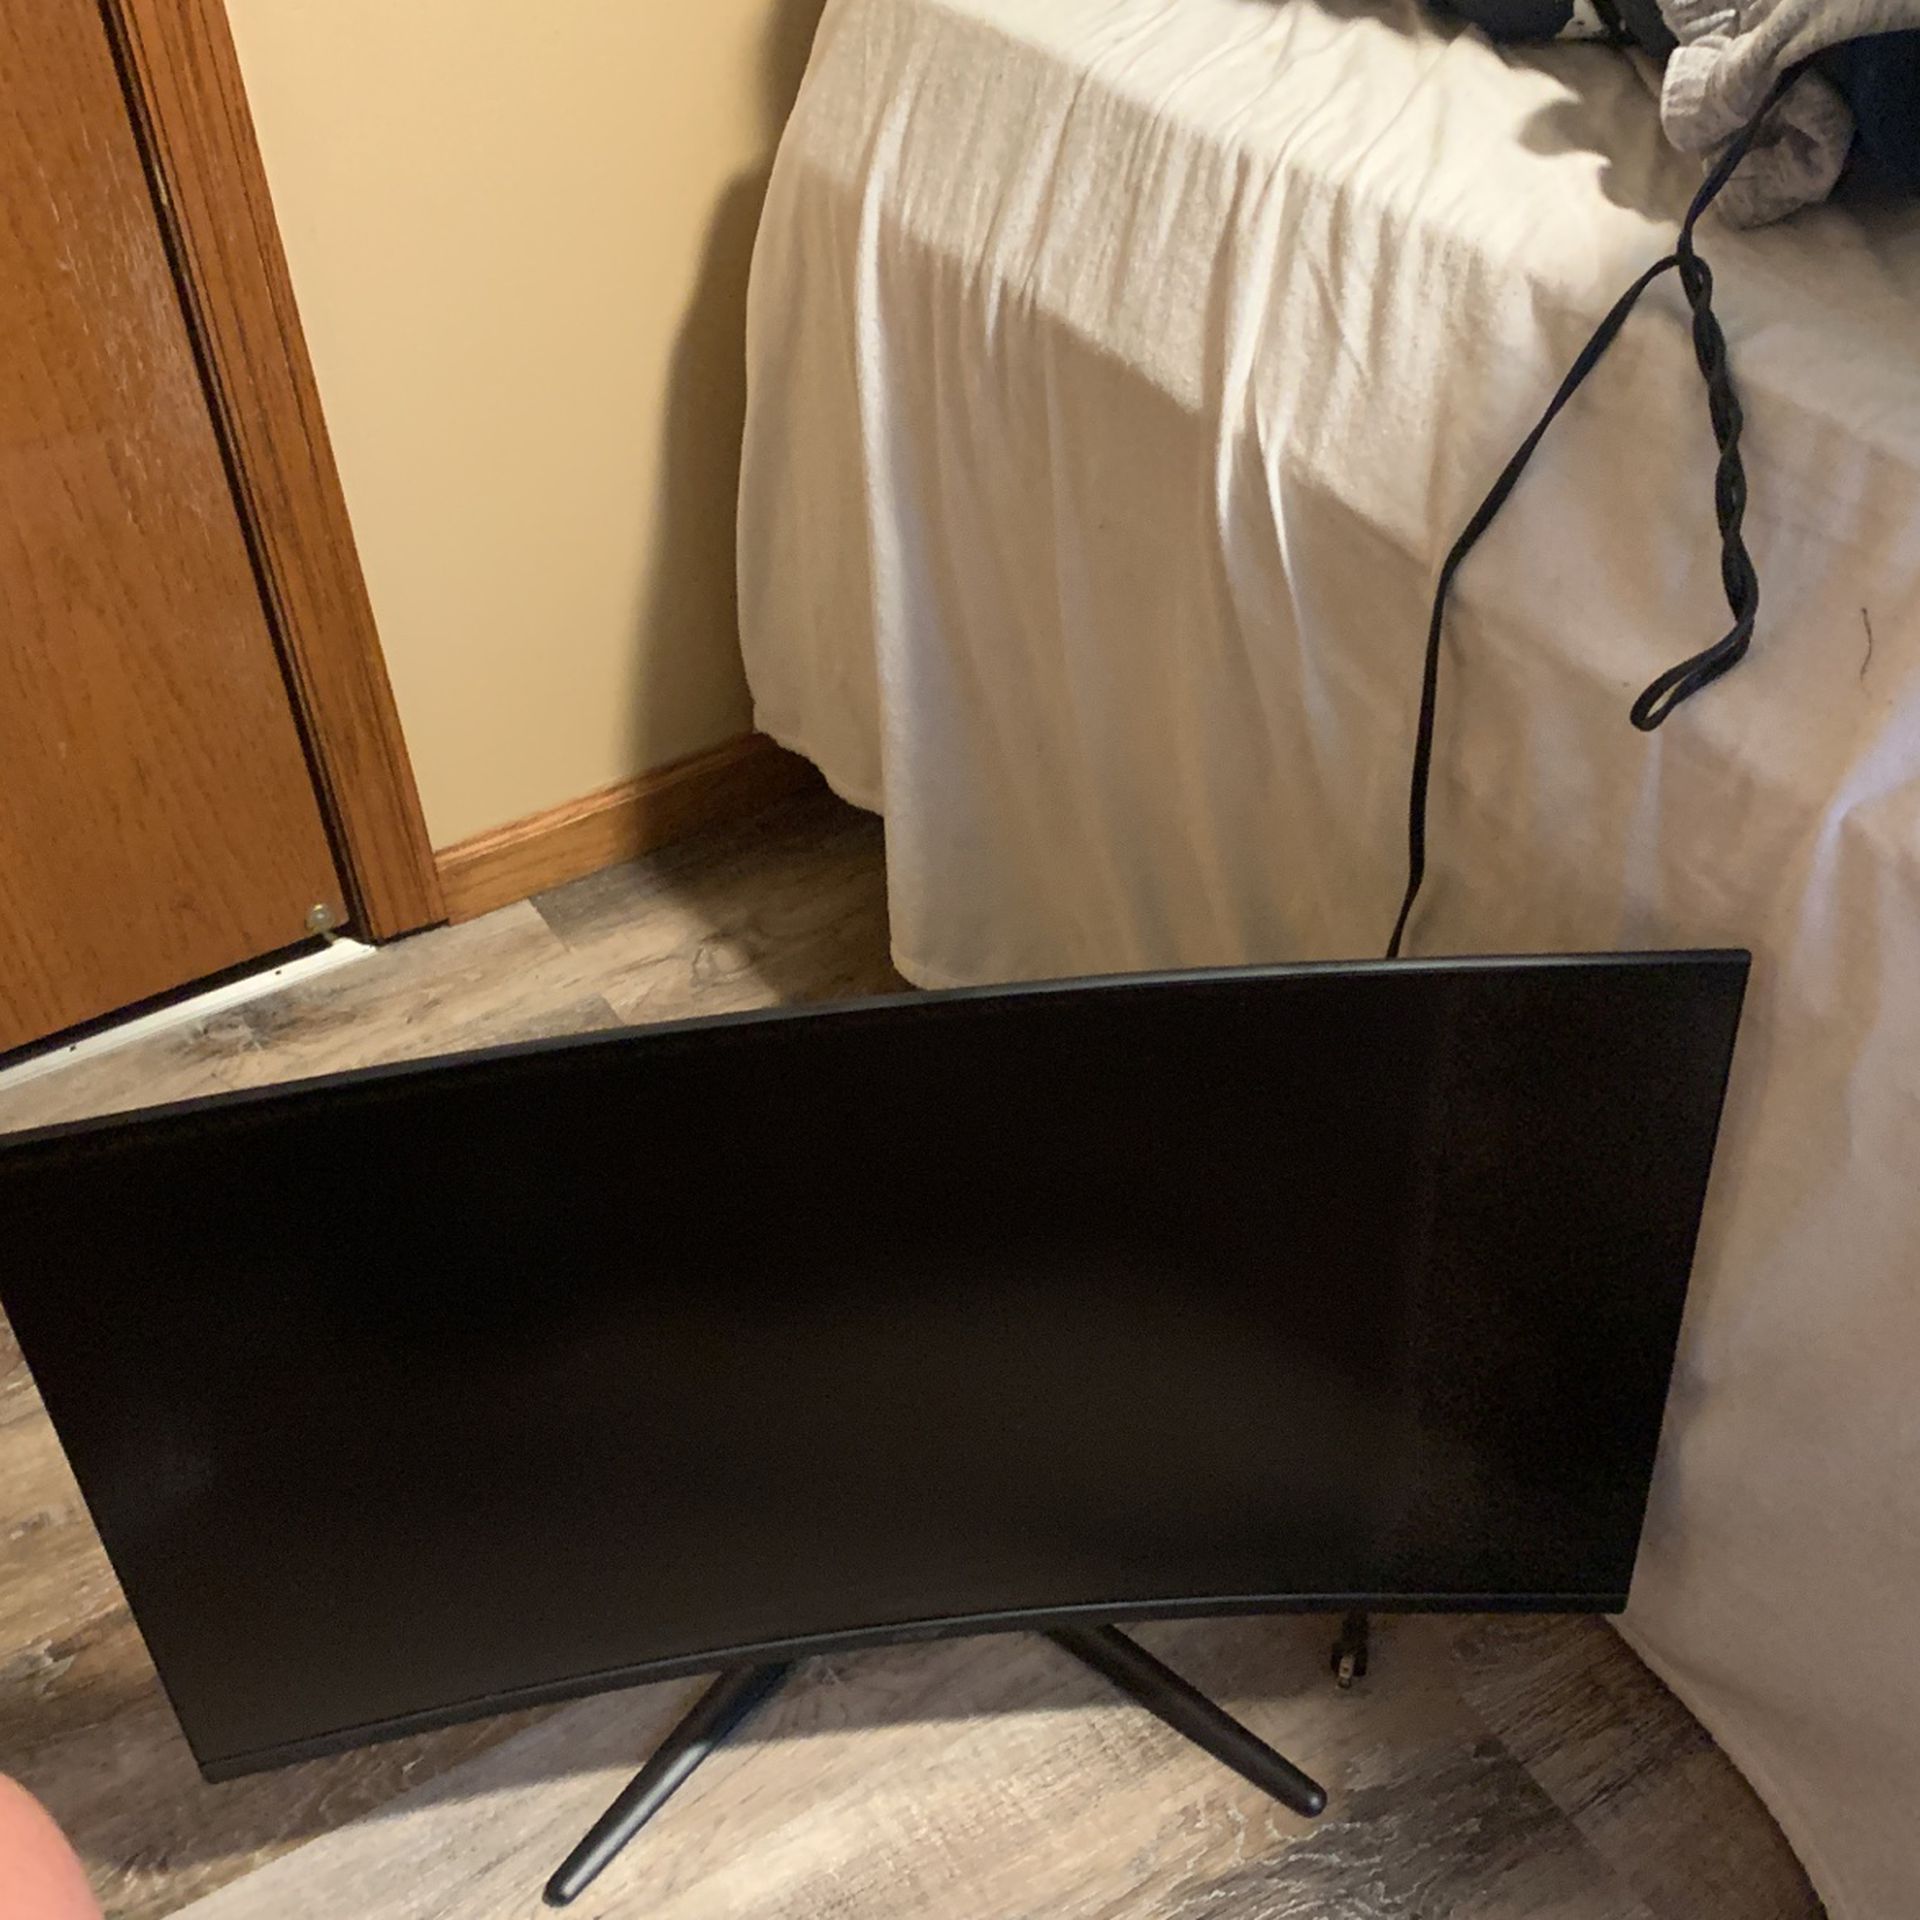 32 Inch Curved 4K 140hz Acre Monitor Great For Work And Gaming 